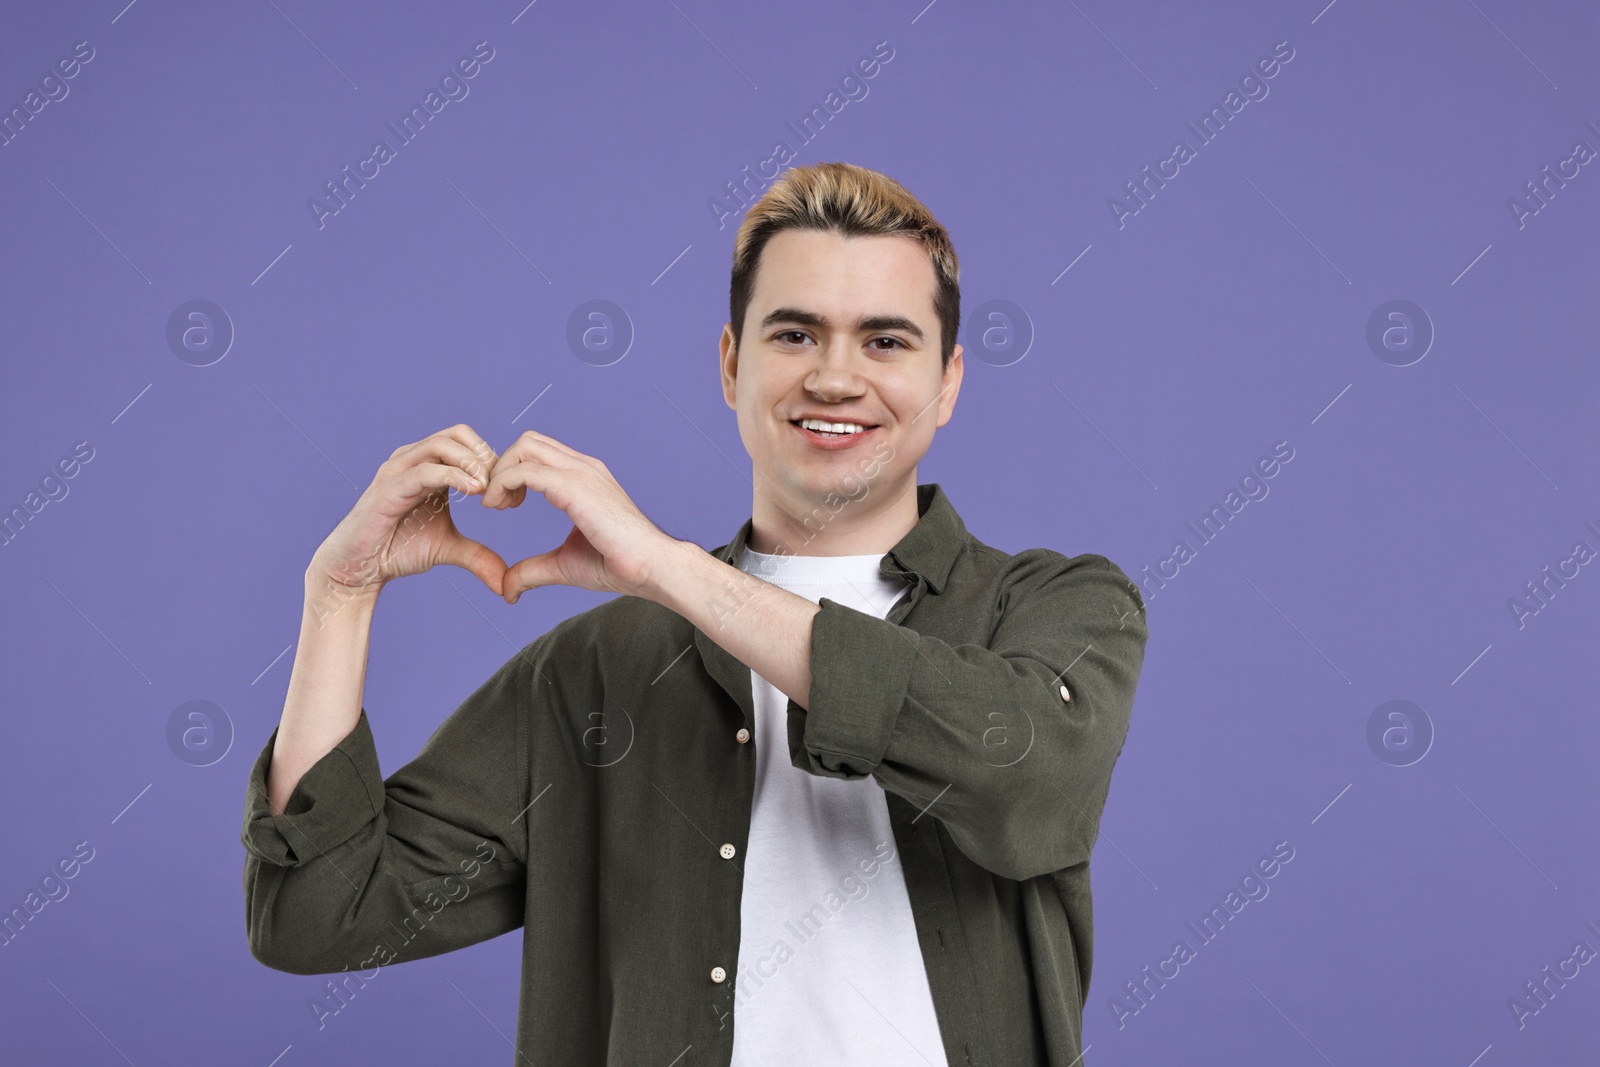 Photo of Young man showing heart gesture with hands on purple background